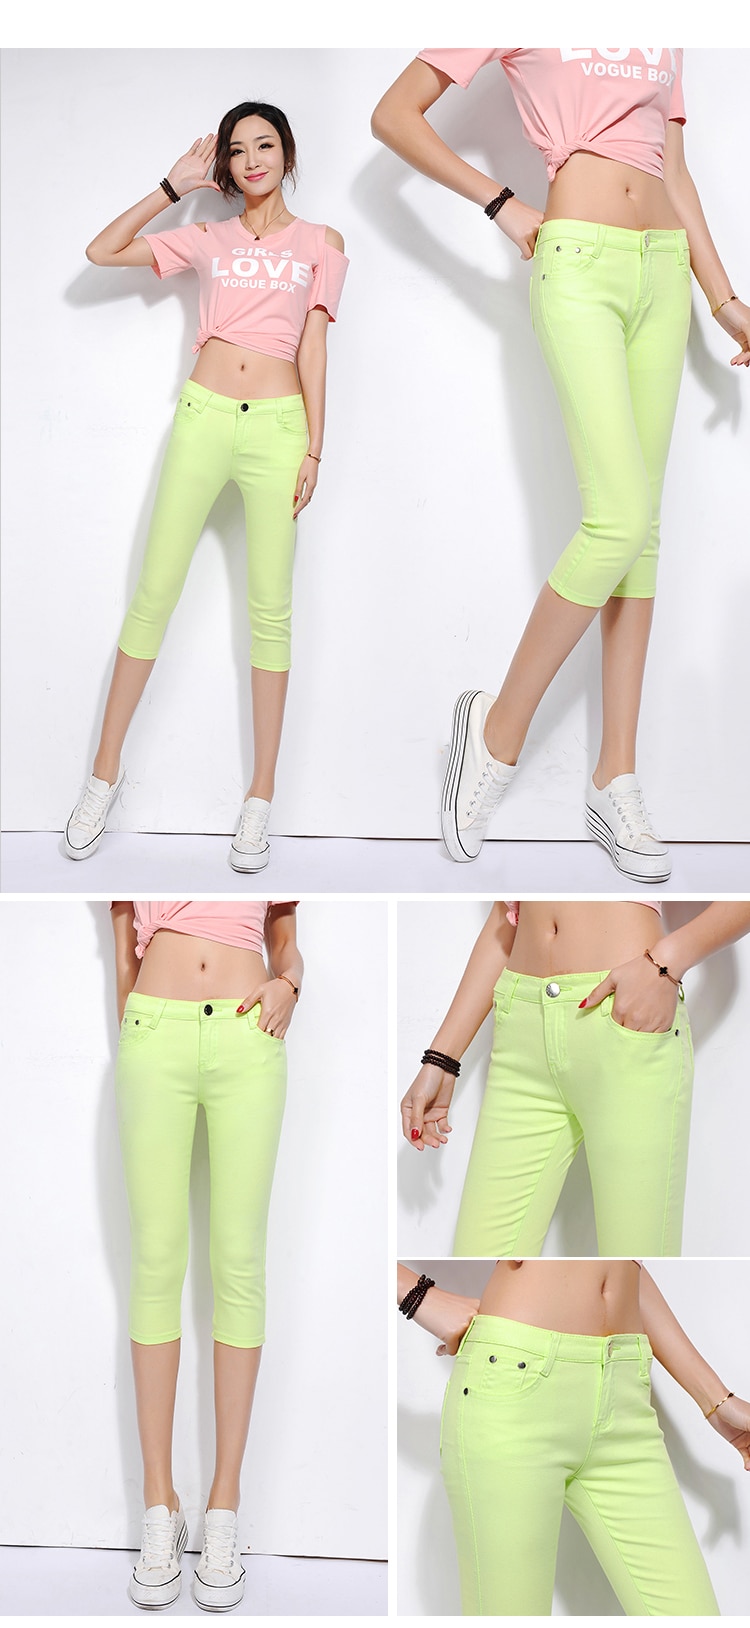 2018 New Spring Leisure Stretch Candy Color Cropped pants Female pencil pants Thin section Trousers Female feet Breeches (17)